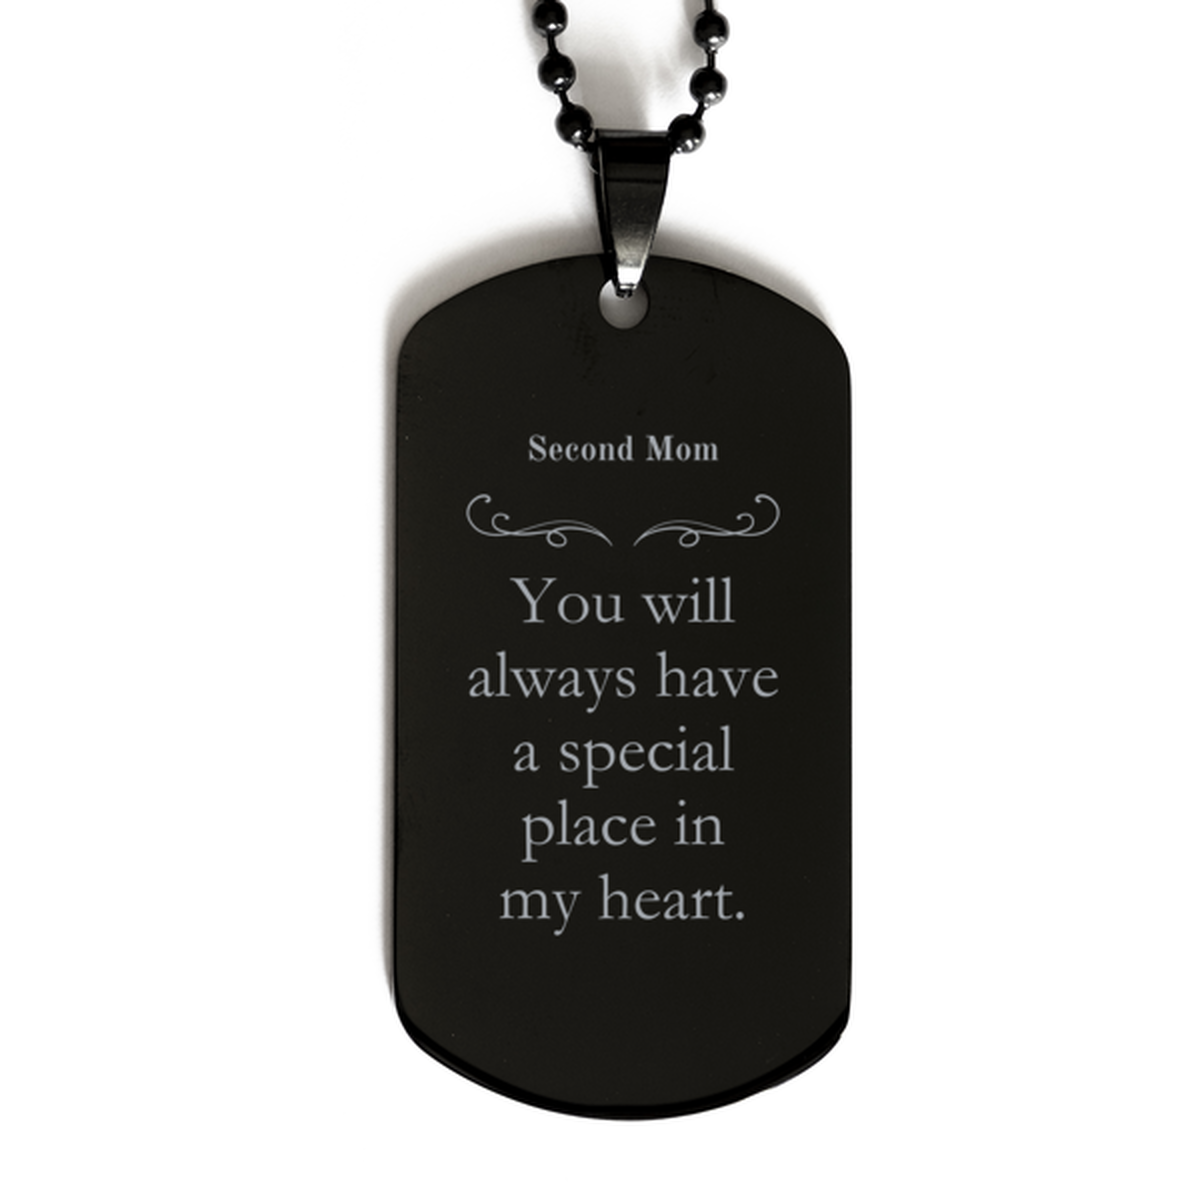 Second Mom Engraved Black Dog Tag - Special Place in My Heart - Unique Gift for Mothers Day, Birthday, Christmas, and Holidays - Inspirational Jewelry for Second Mom - You will always have a special place in my heart